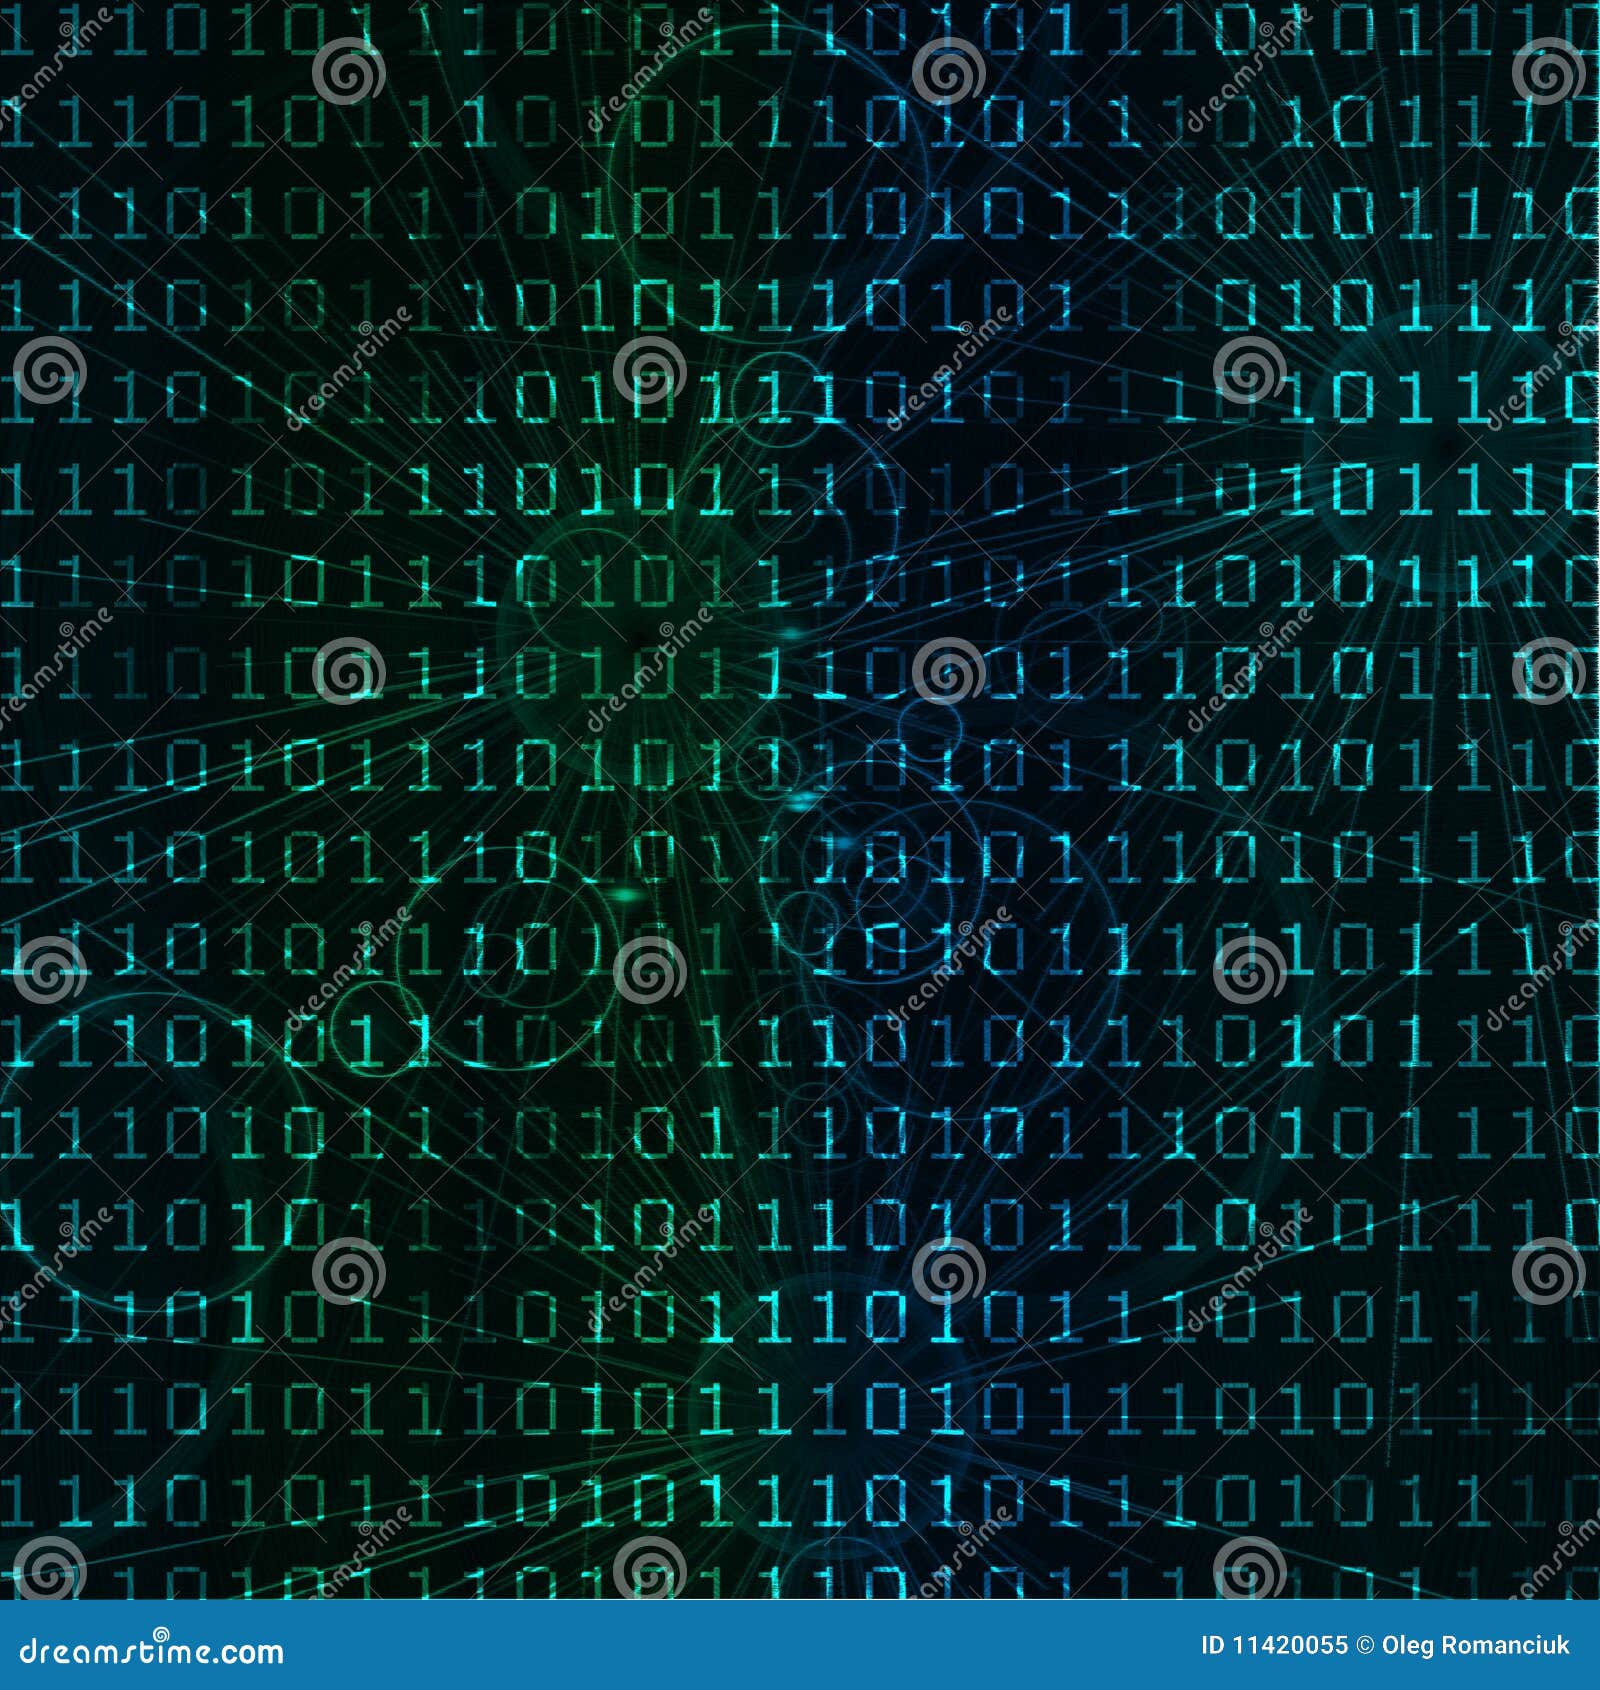 Digital background. Illustration of the binary code over abstract figures